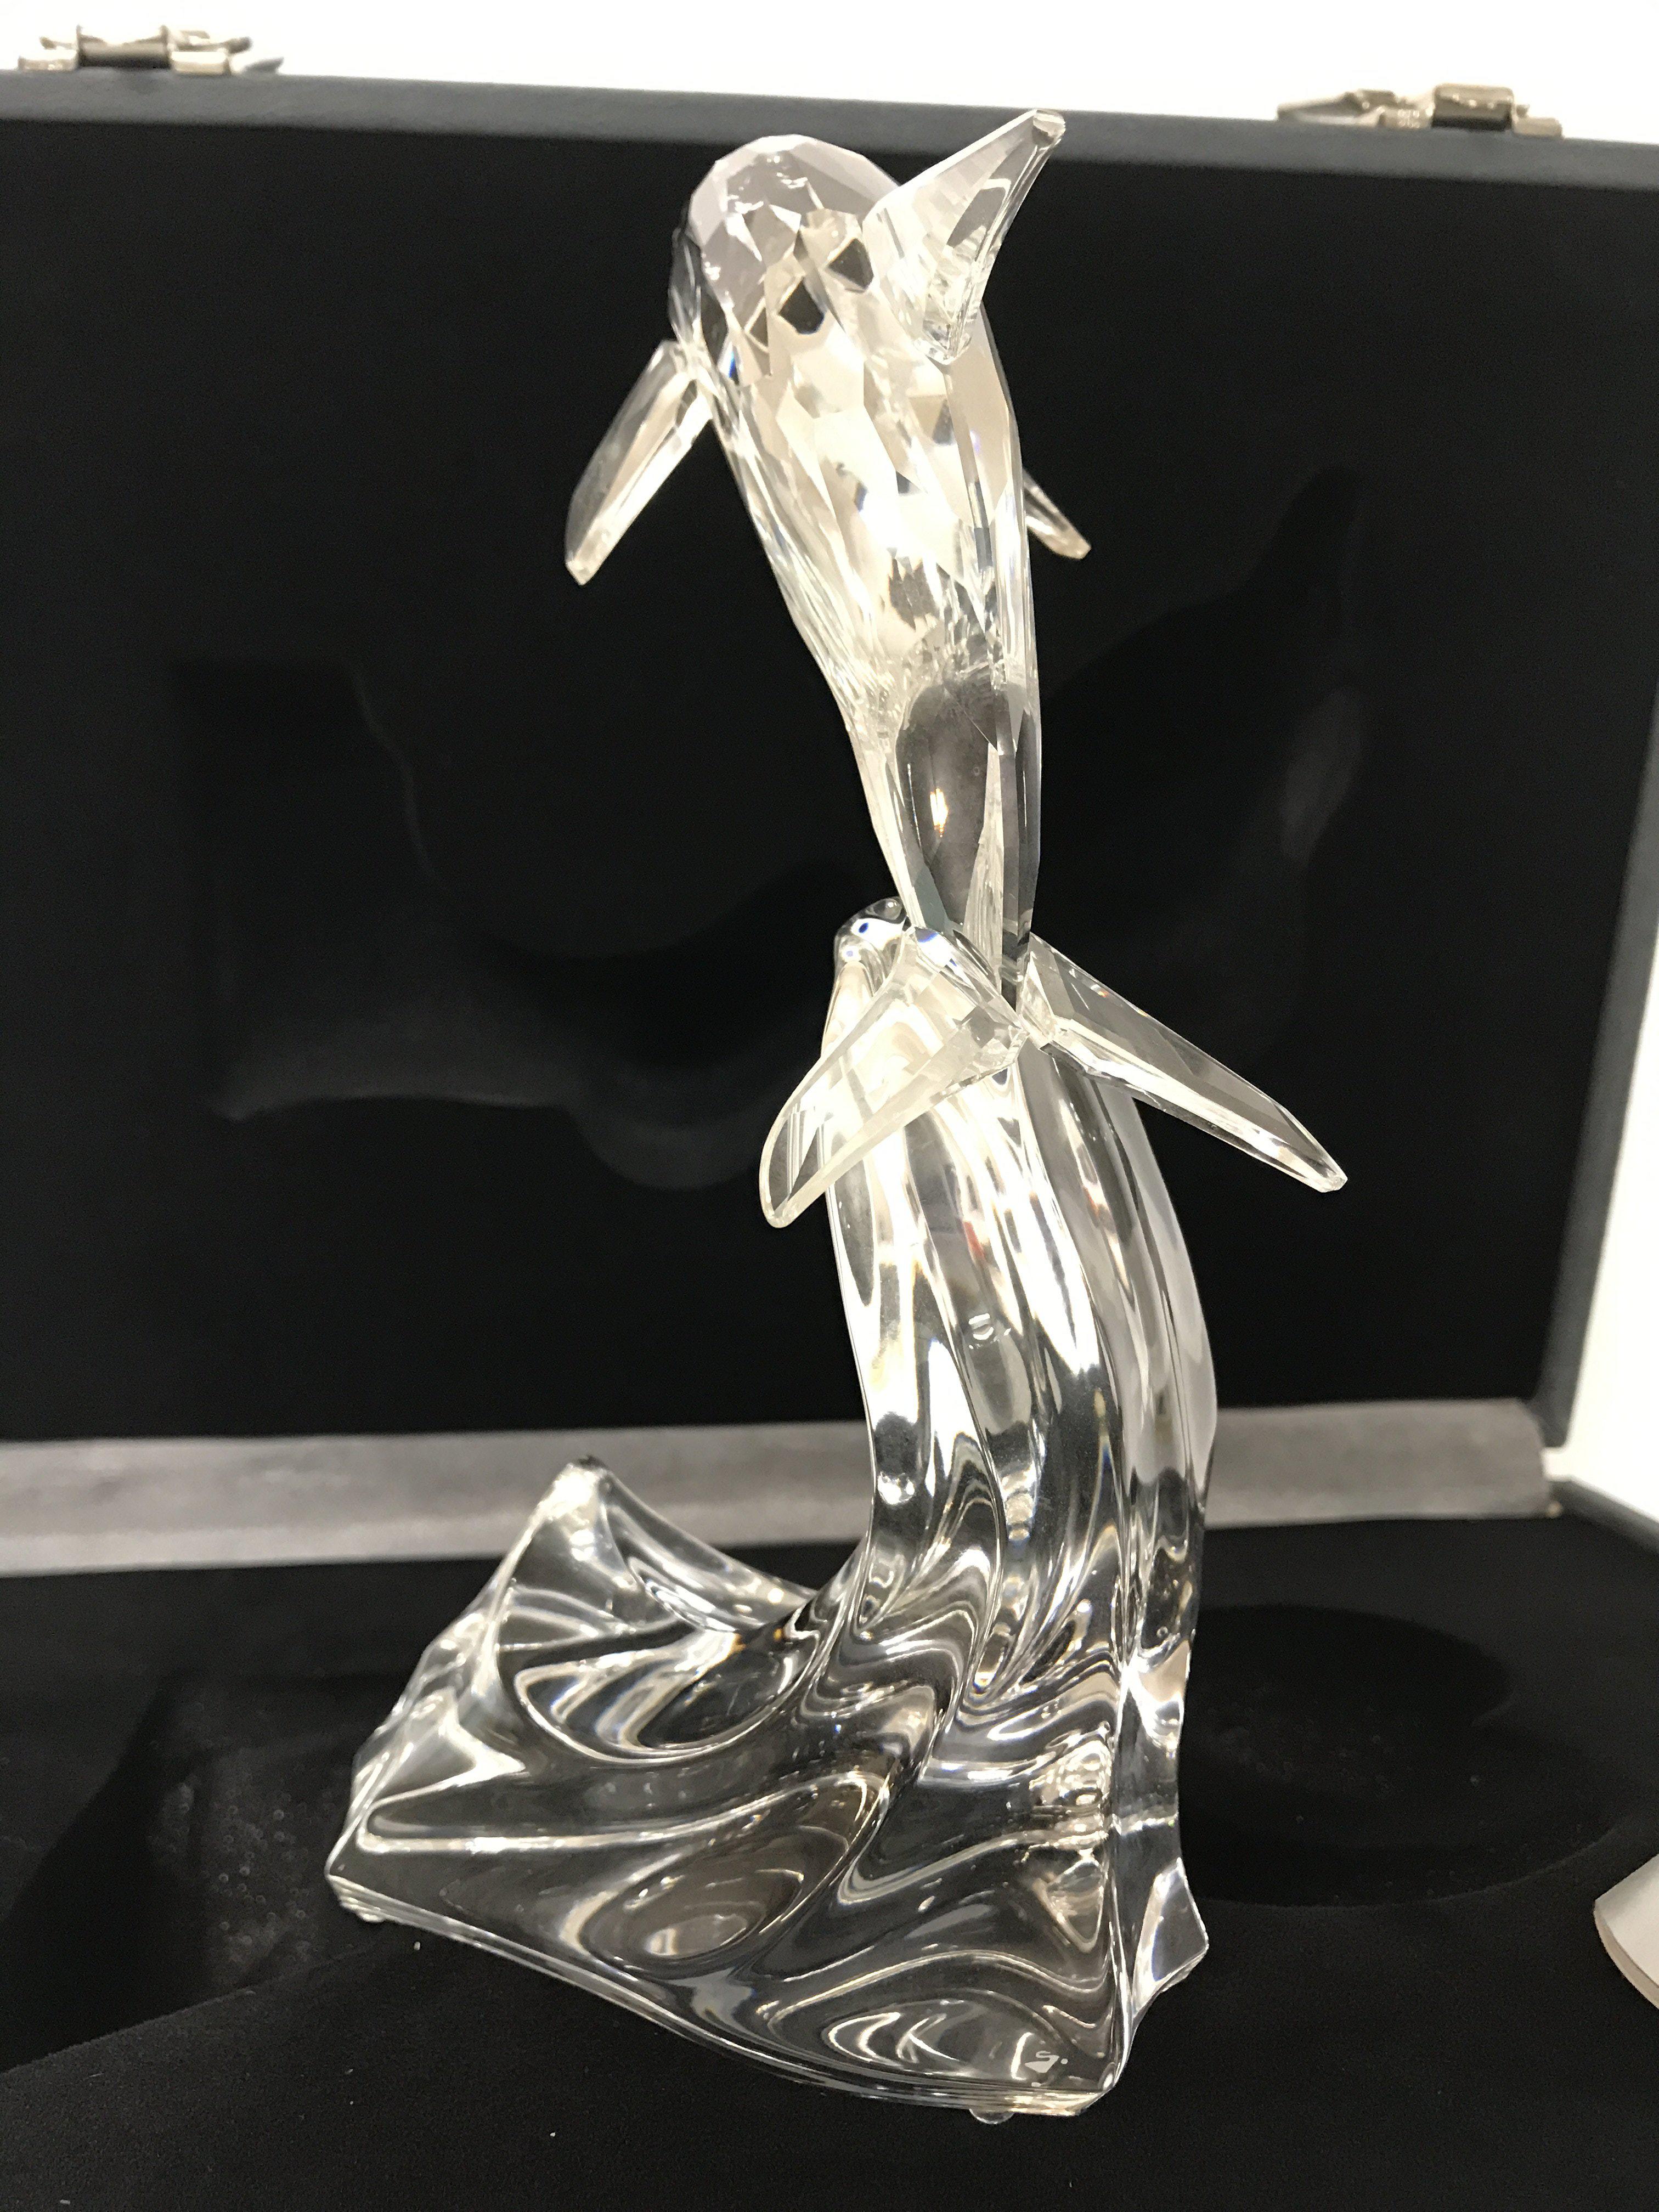 A Boxed and cased Swarovski Crystal Giants Dolphin - Image 2 of 5